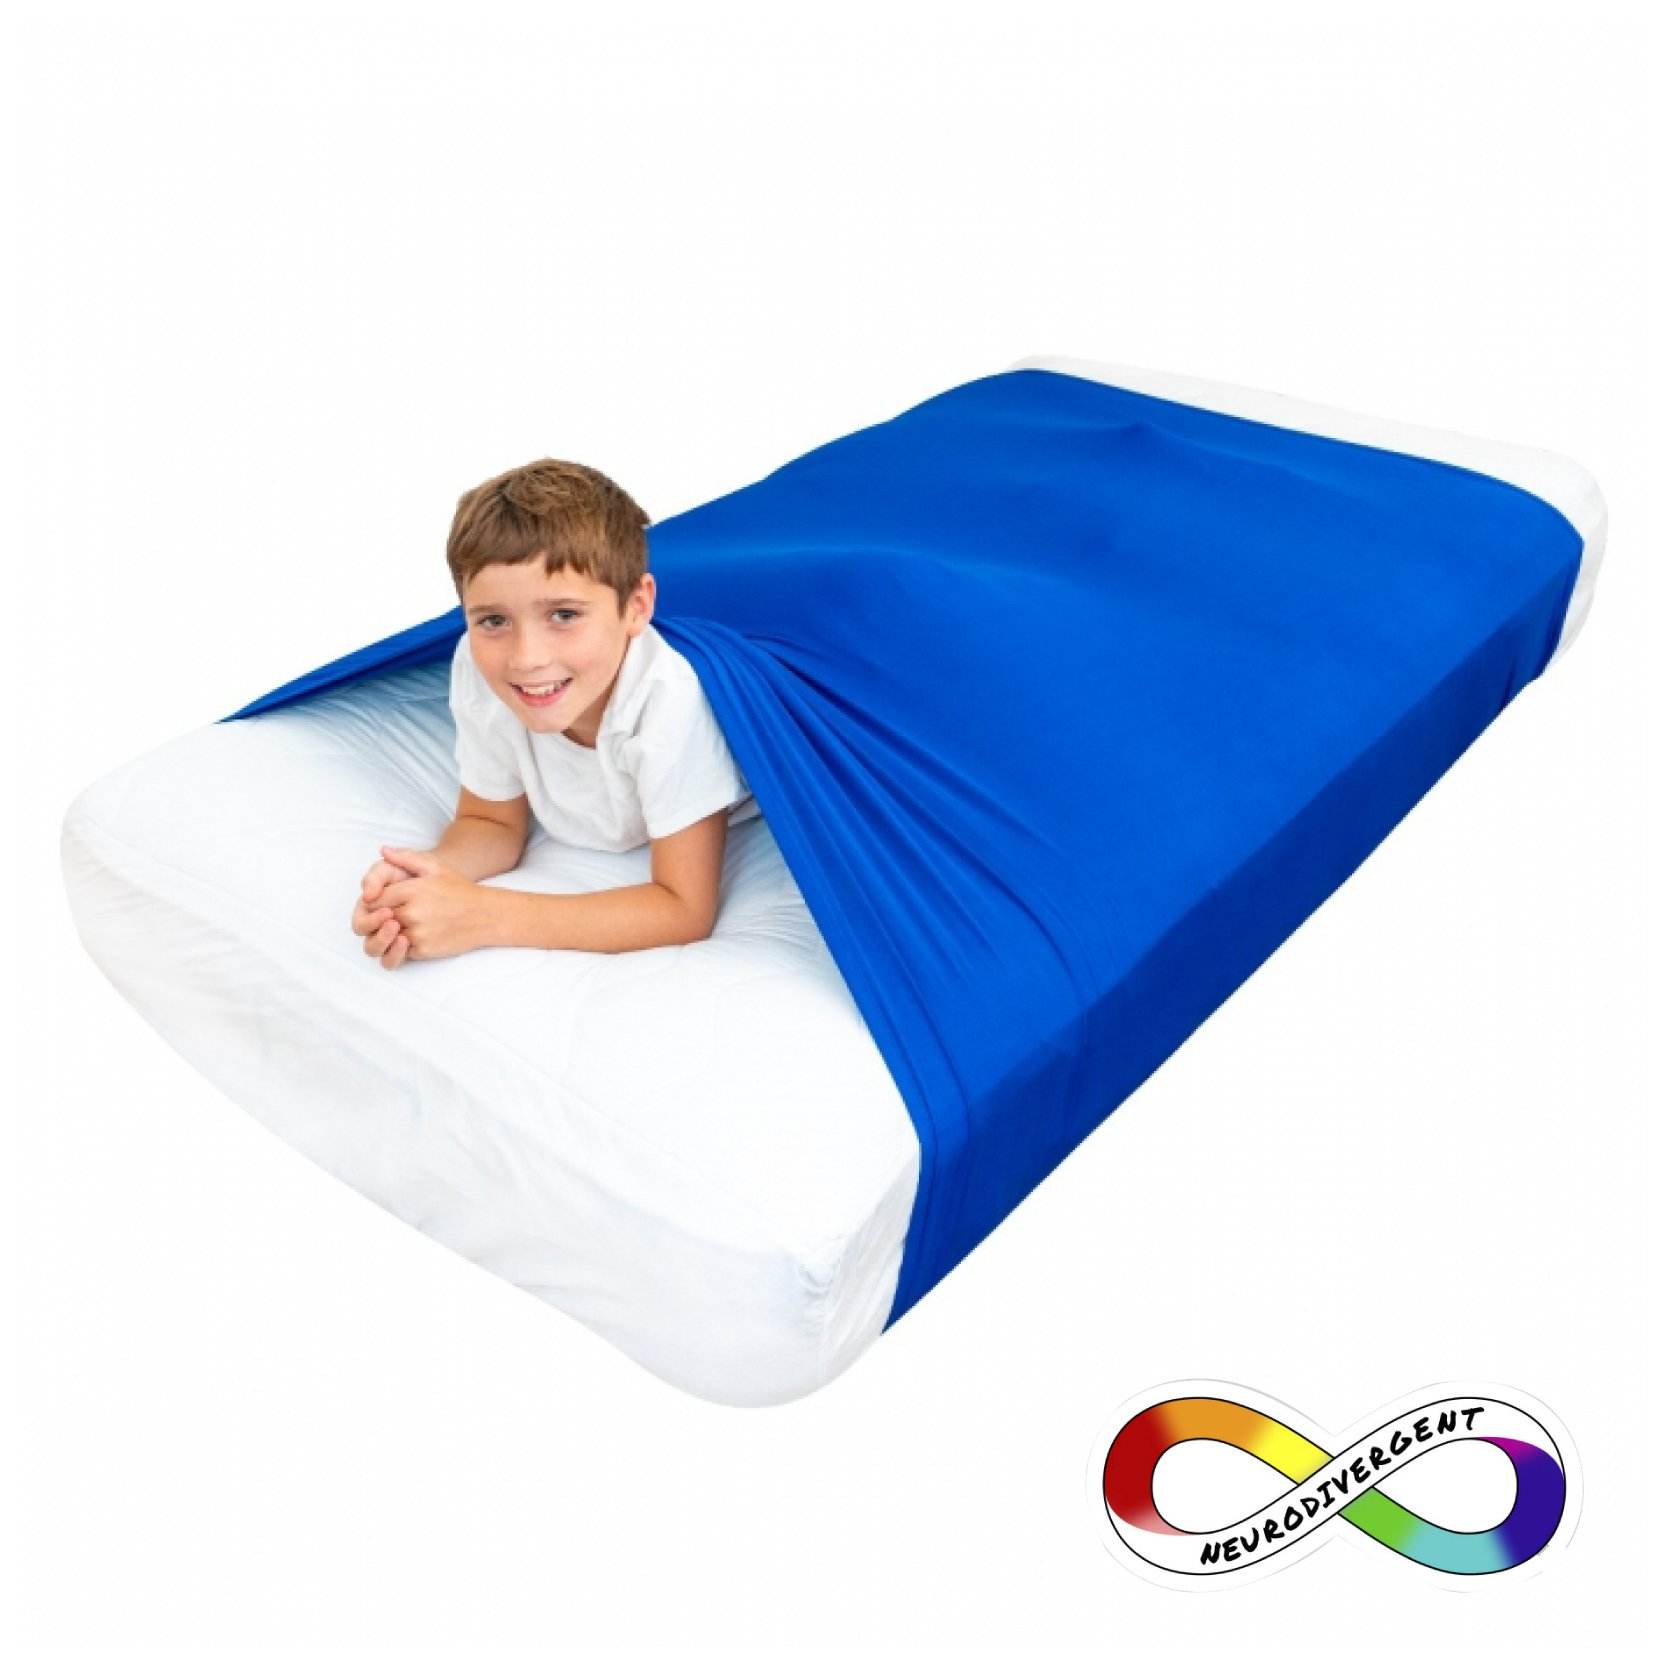 Comforting weighted blanket for children with autism